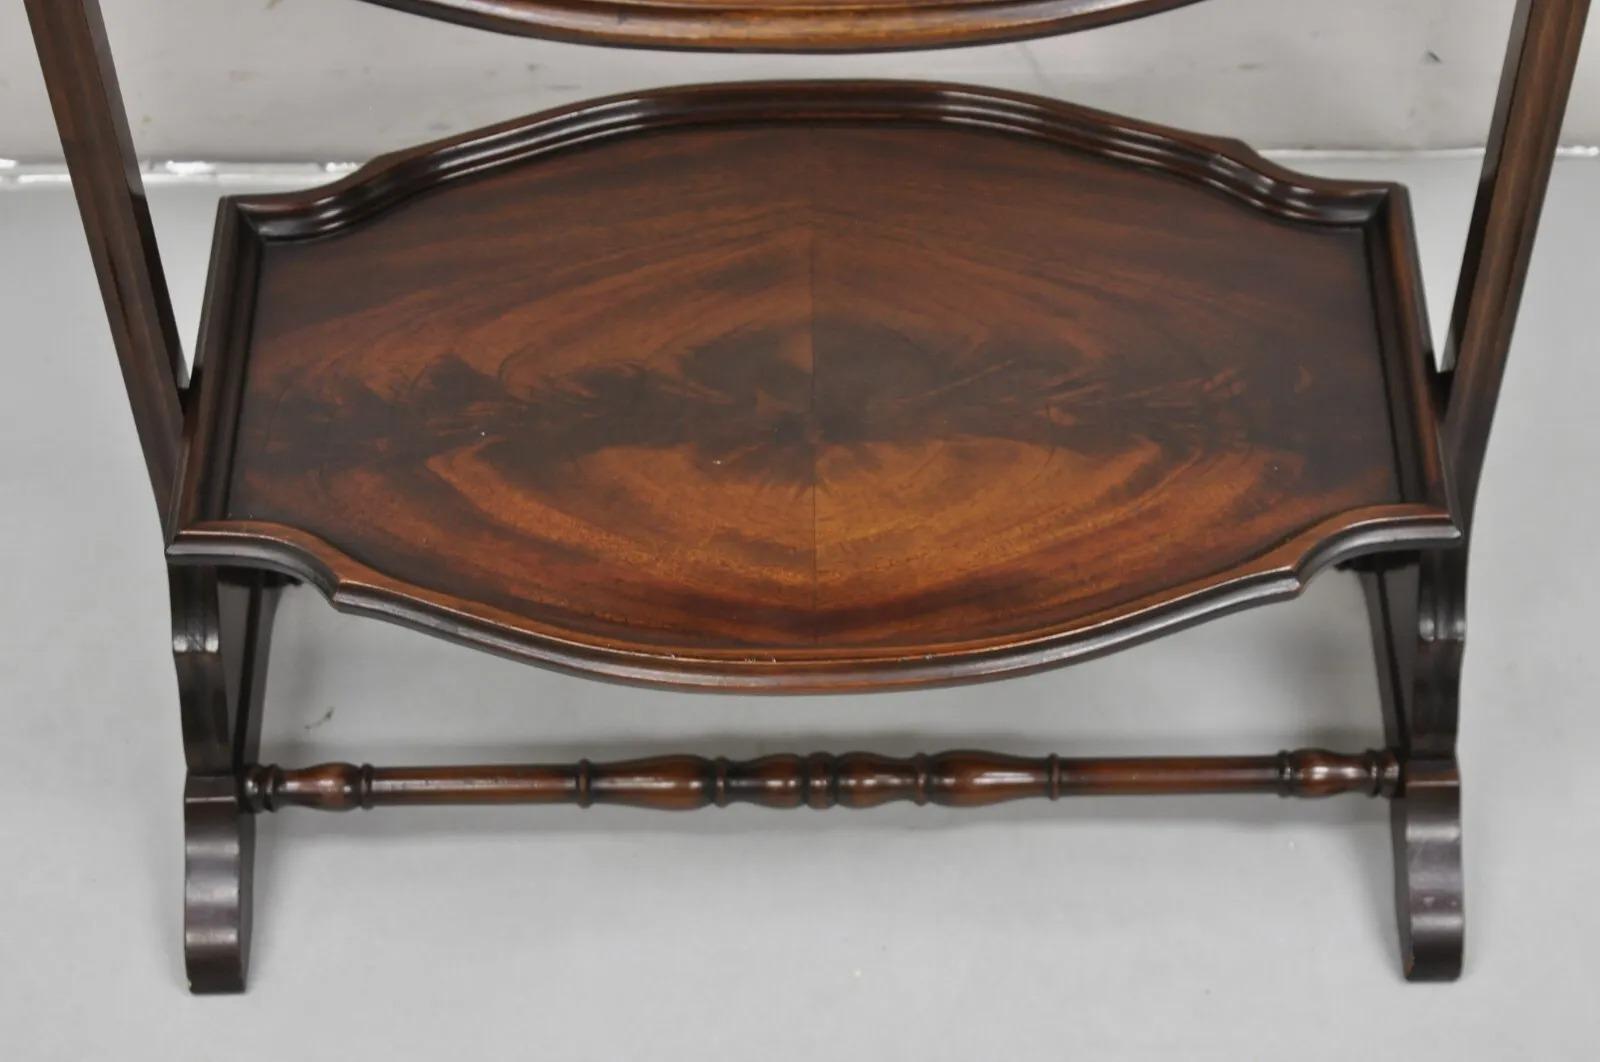 Vintage Regency Style Mahogany 2 Tier Folding Muffin Cake Stand Side Table For Sale 1